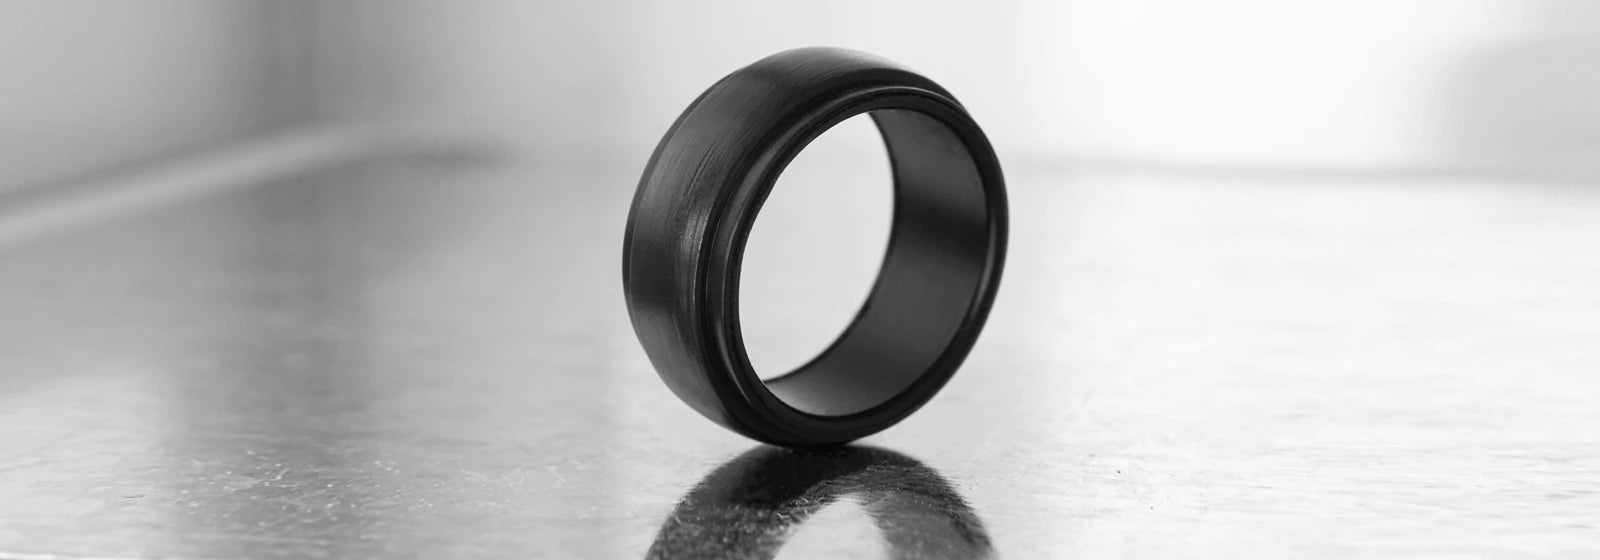 Silicone Rings